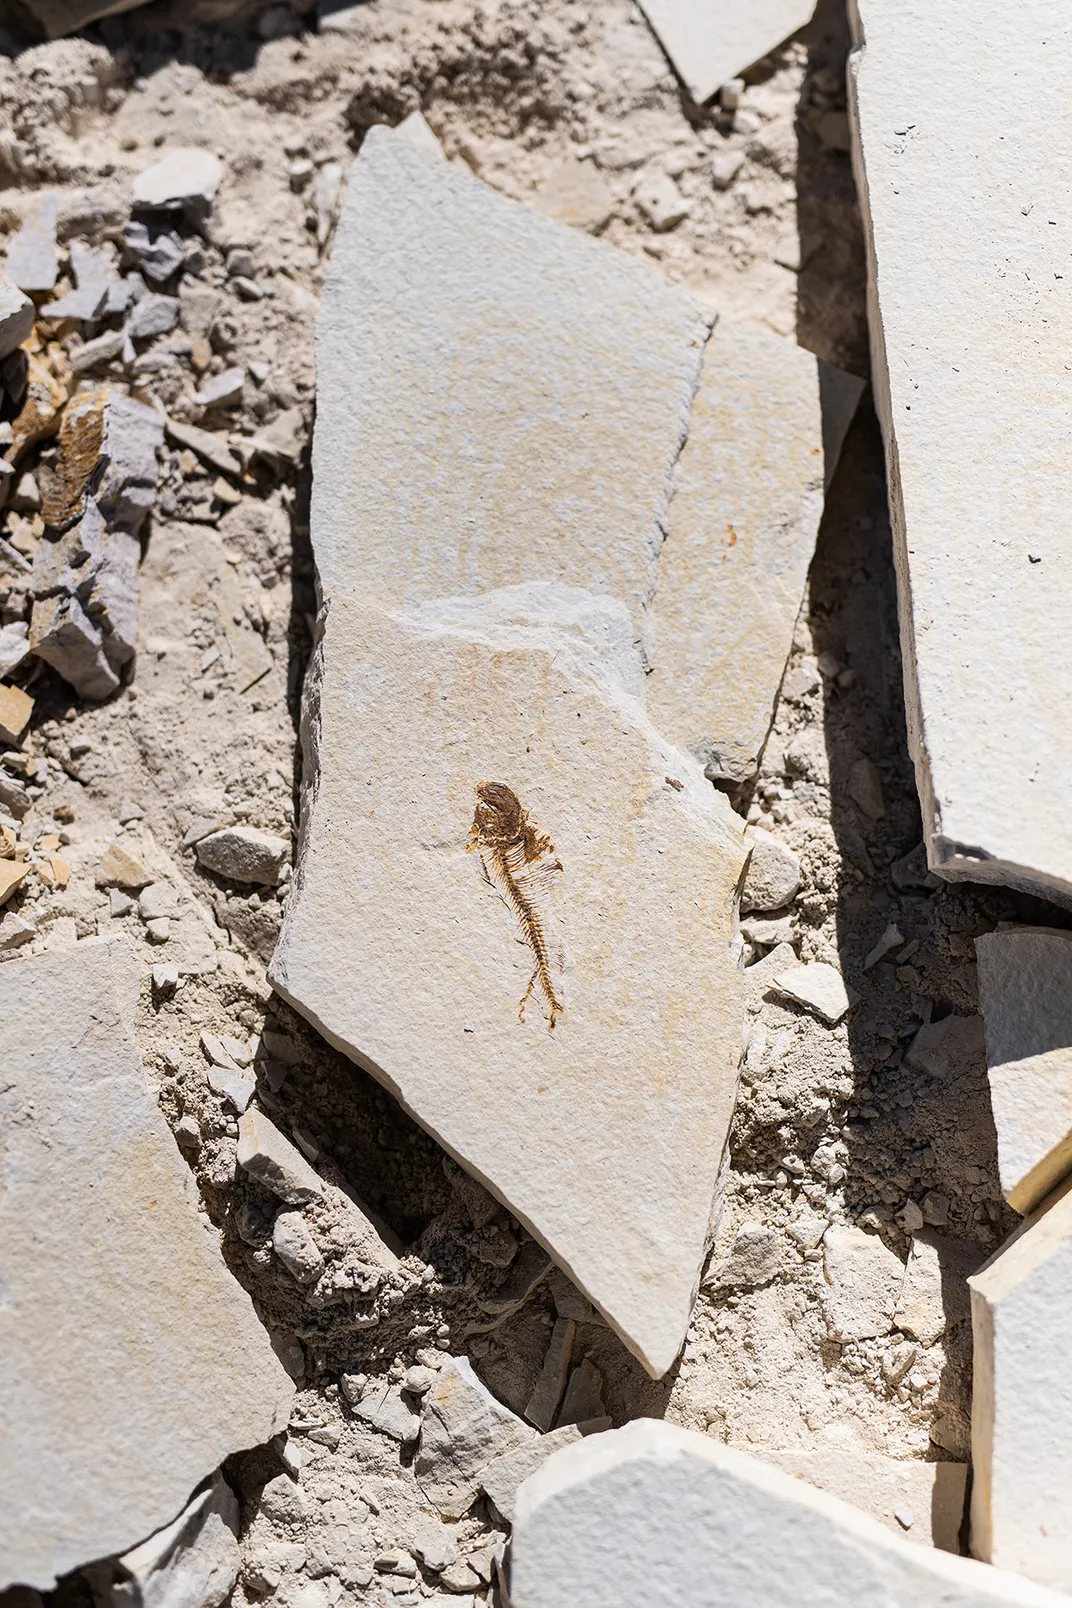 A Diplomystus dentatus fossil in shale rock at American Fossil Quarry.